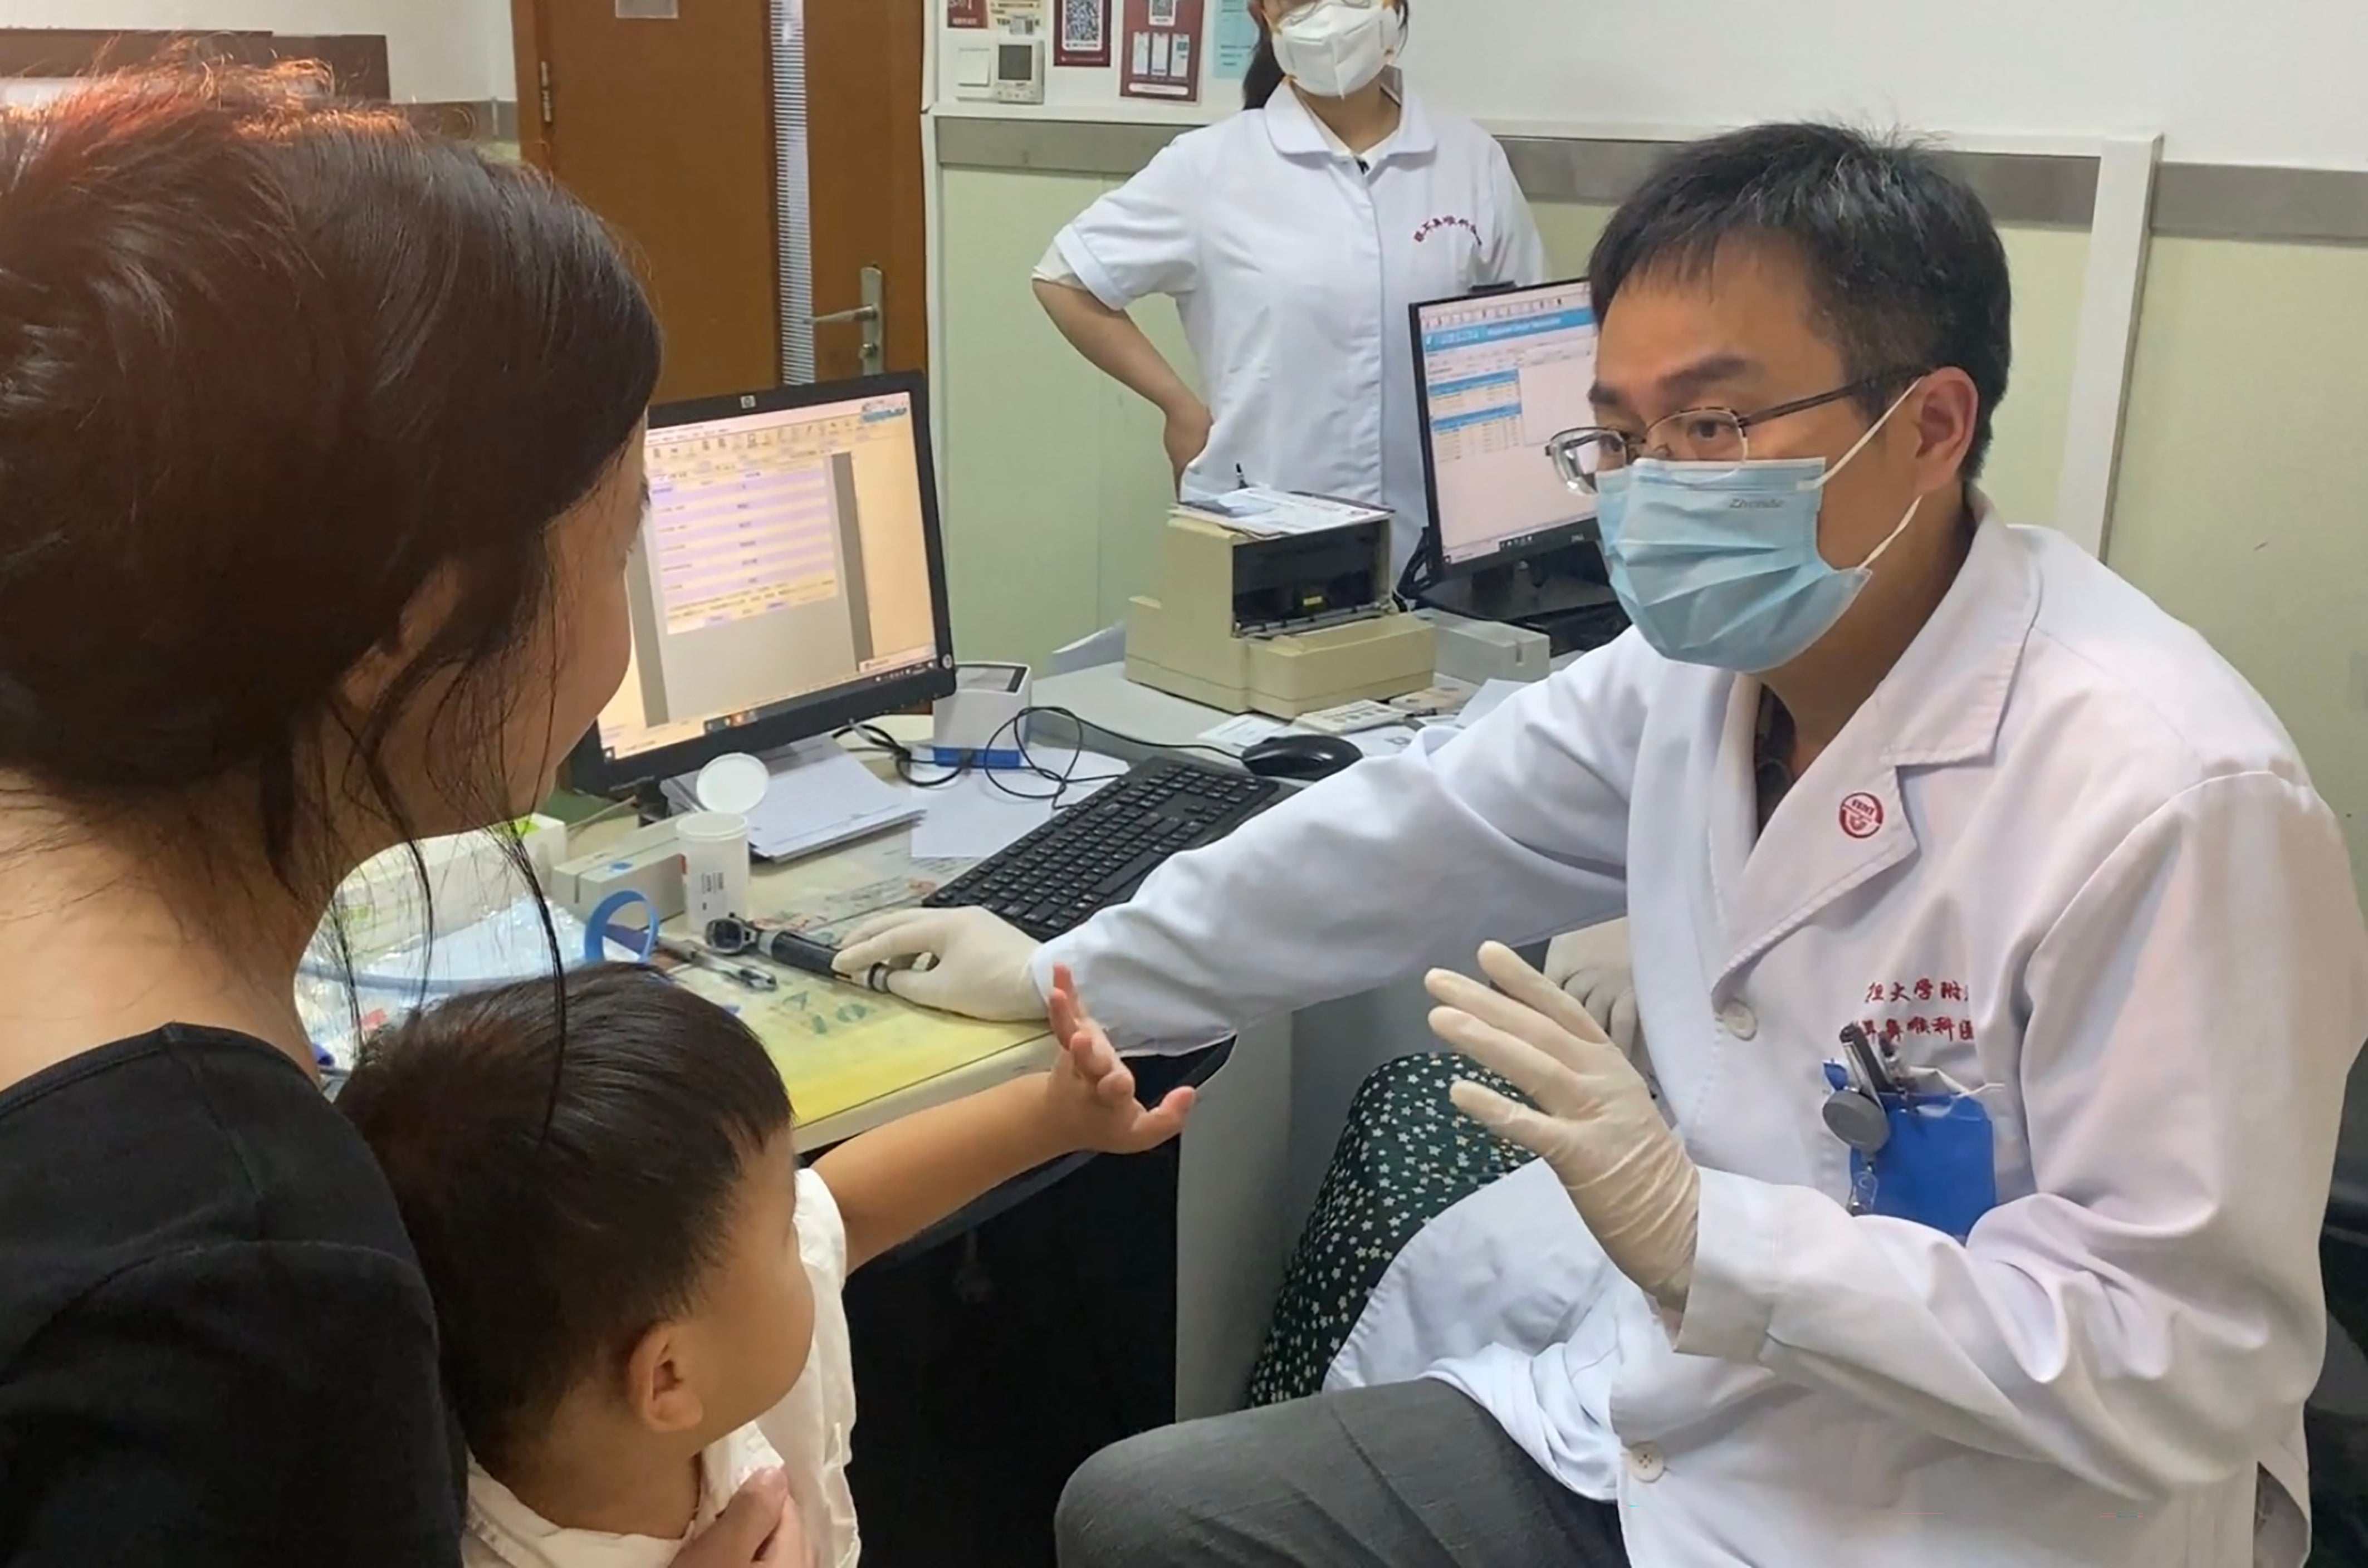 Two children in China who were born deaf can now listen and dance to music after undergoing pioneering gene therapy that restored hearing in both ears